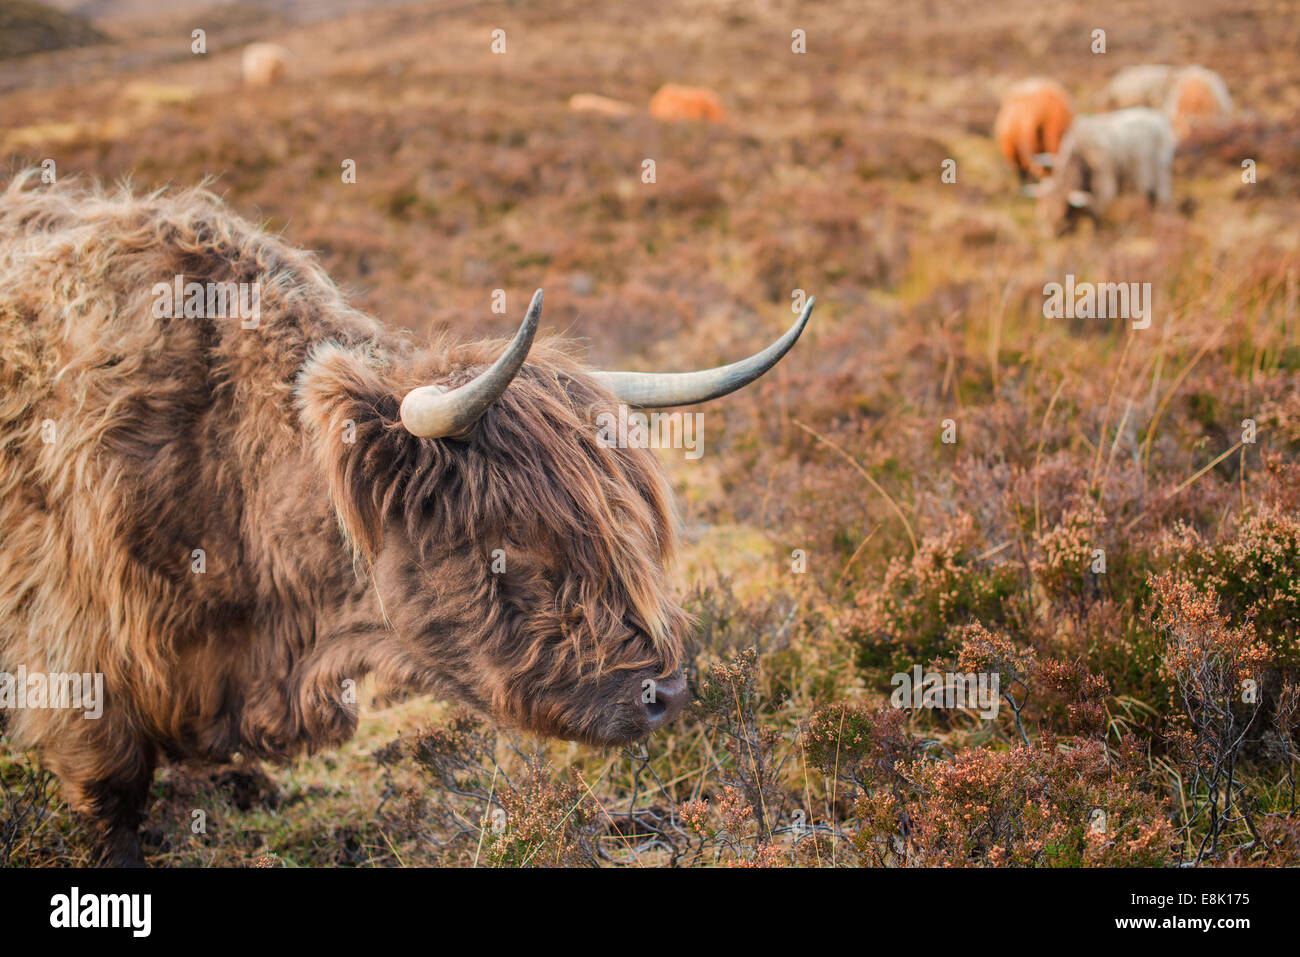 A highland cattle in Scotland. Stock Photo